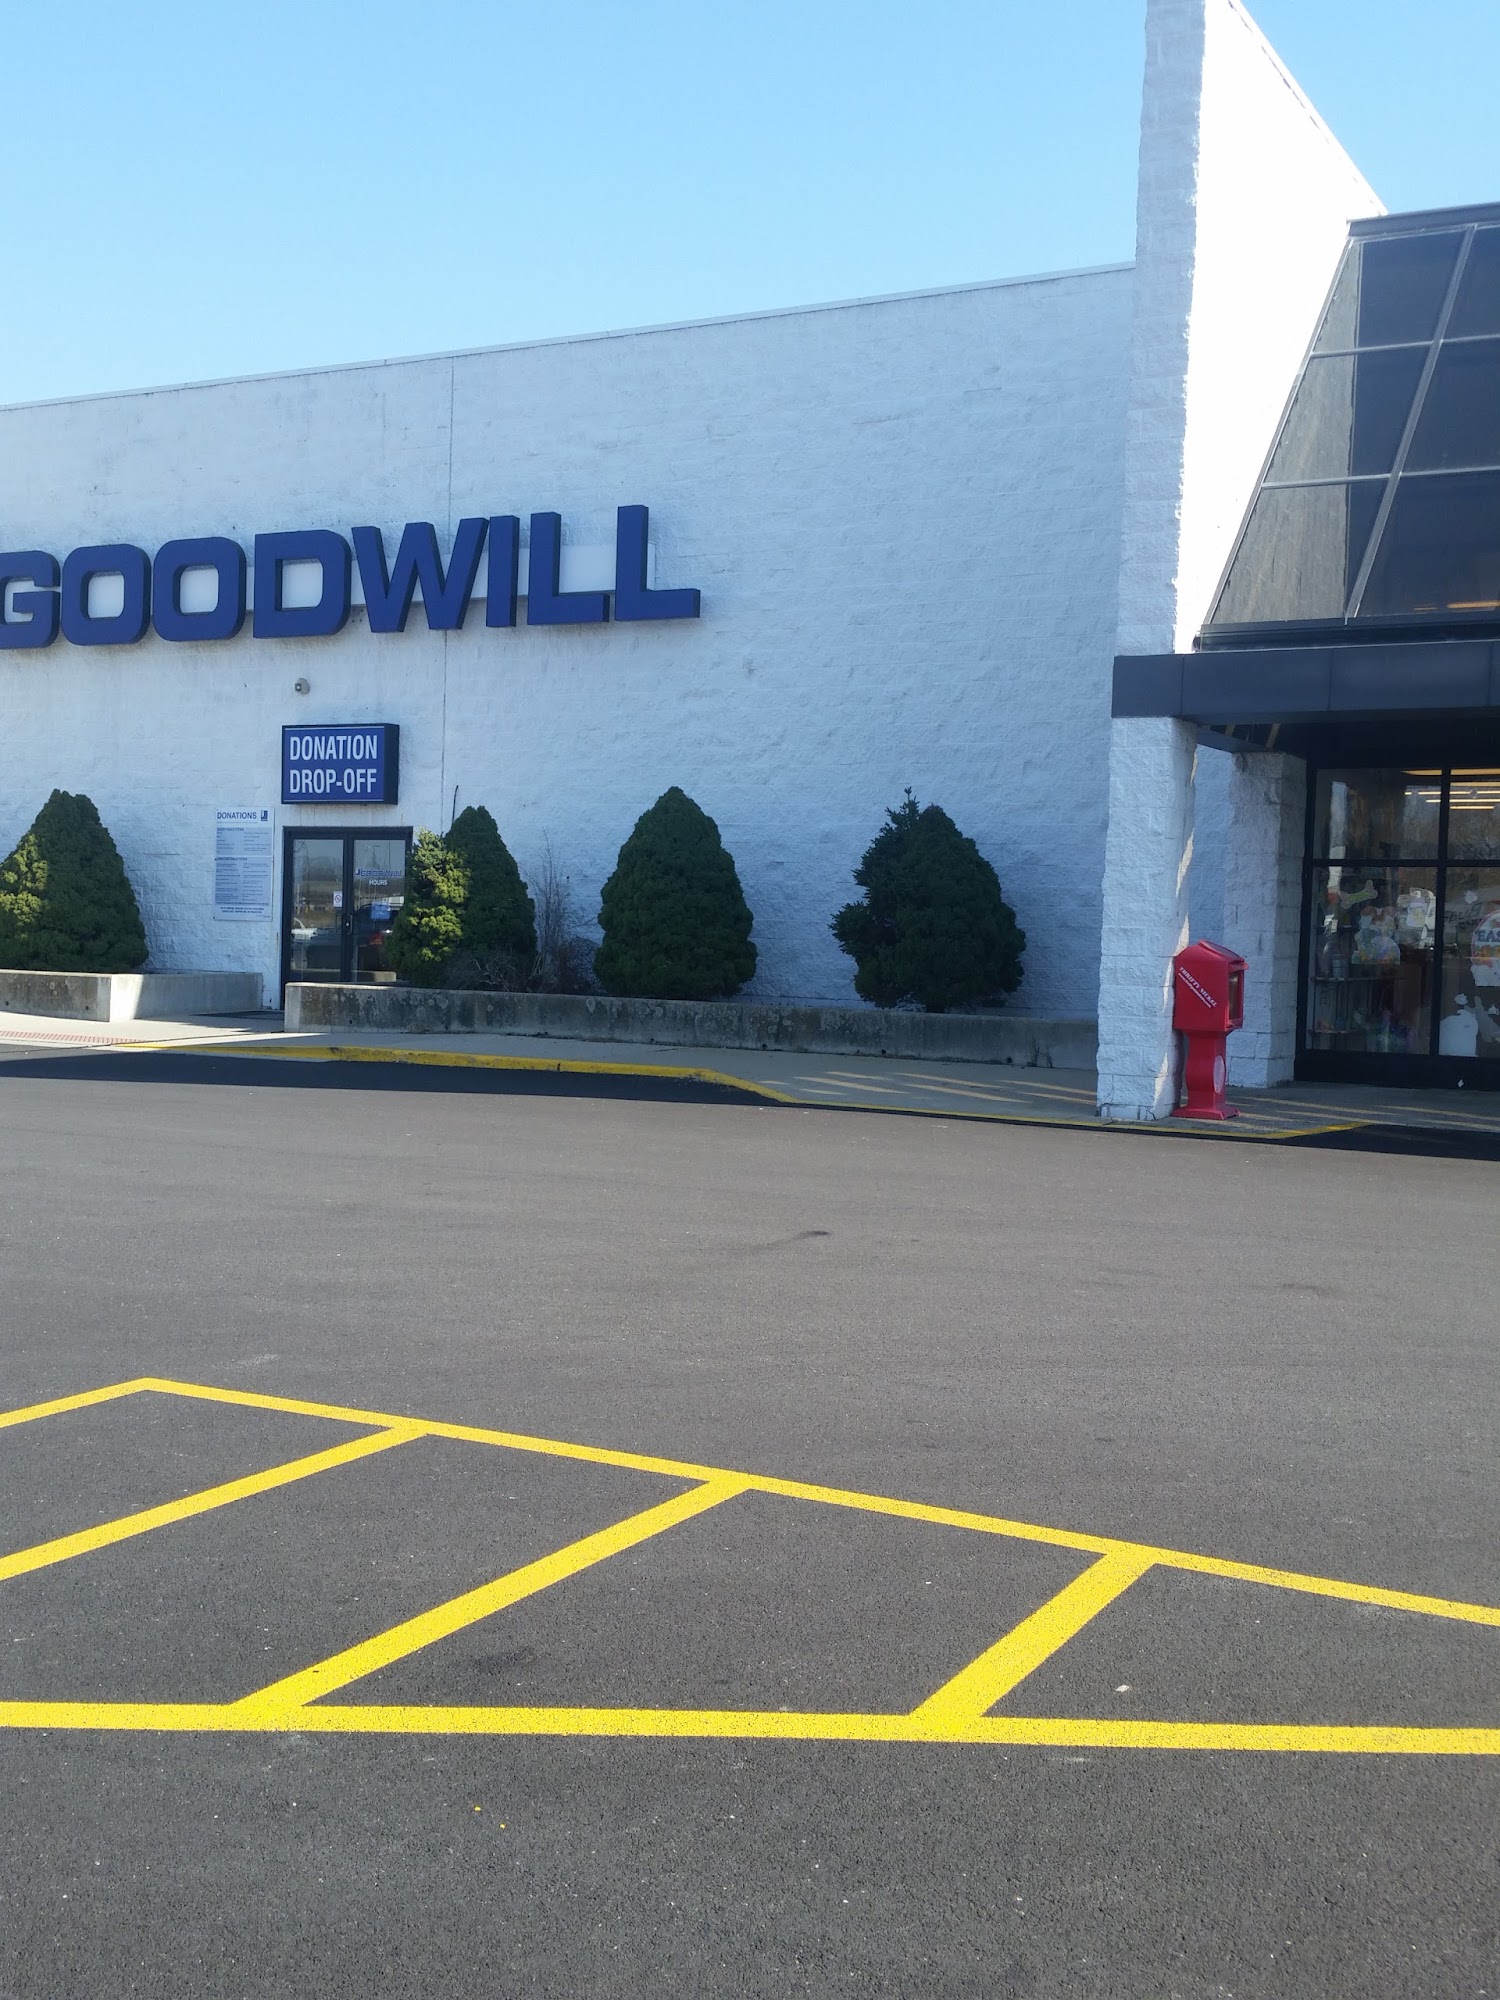 Goodwill Effingham IL - Land of Lincoln Goodwill Industries